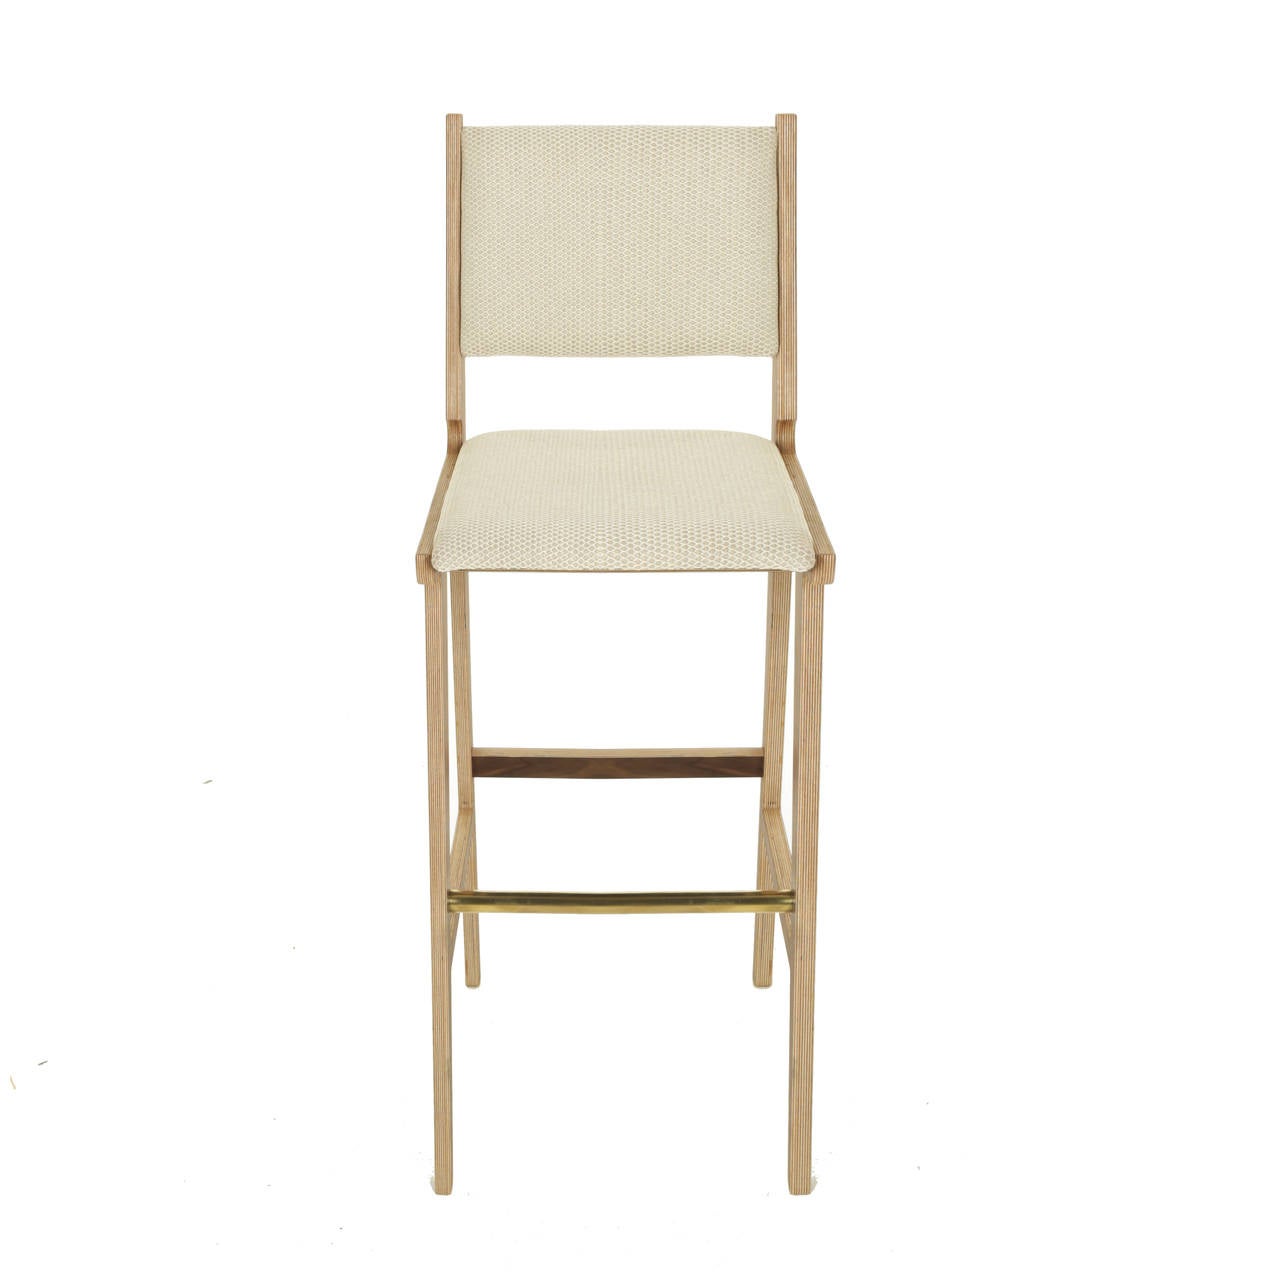 A sculptural bar stool in Baltic Birch plywood available for custom order by Thomas Hayes Studio inspired by the designs of Martin Eisler with comfortable upholstered seat and floating back. The stools have a beautiful detail at the back of the seat